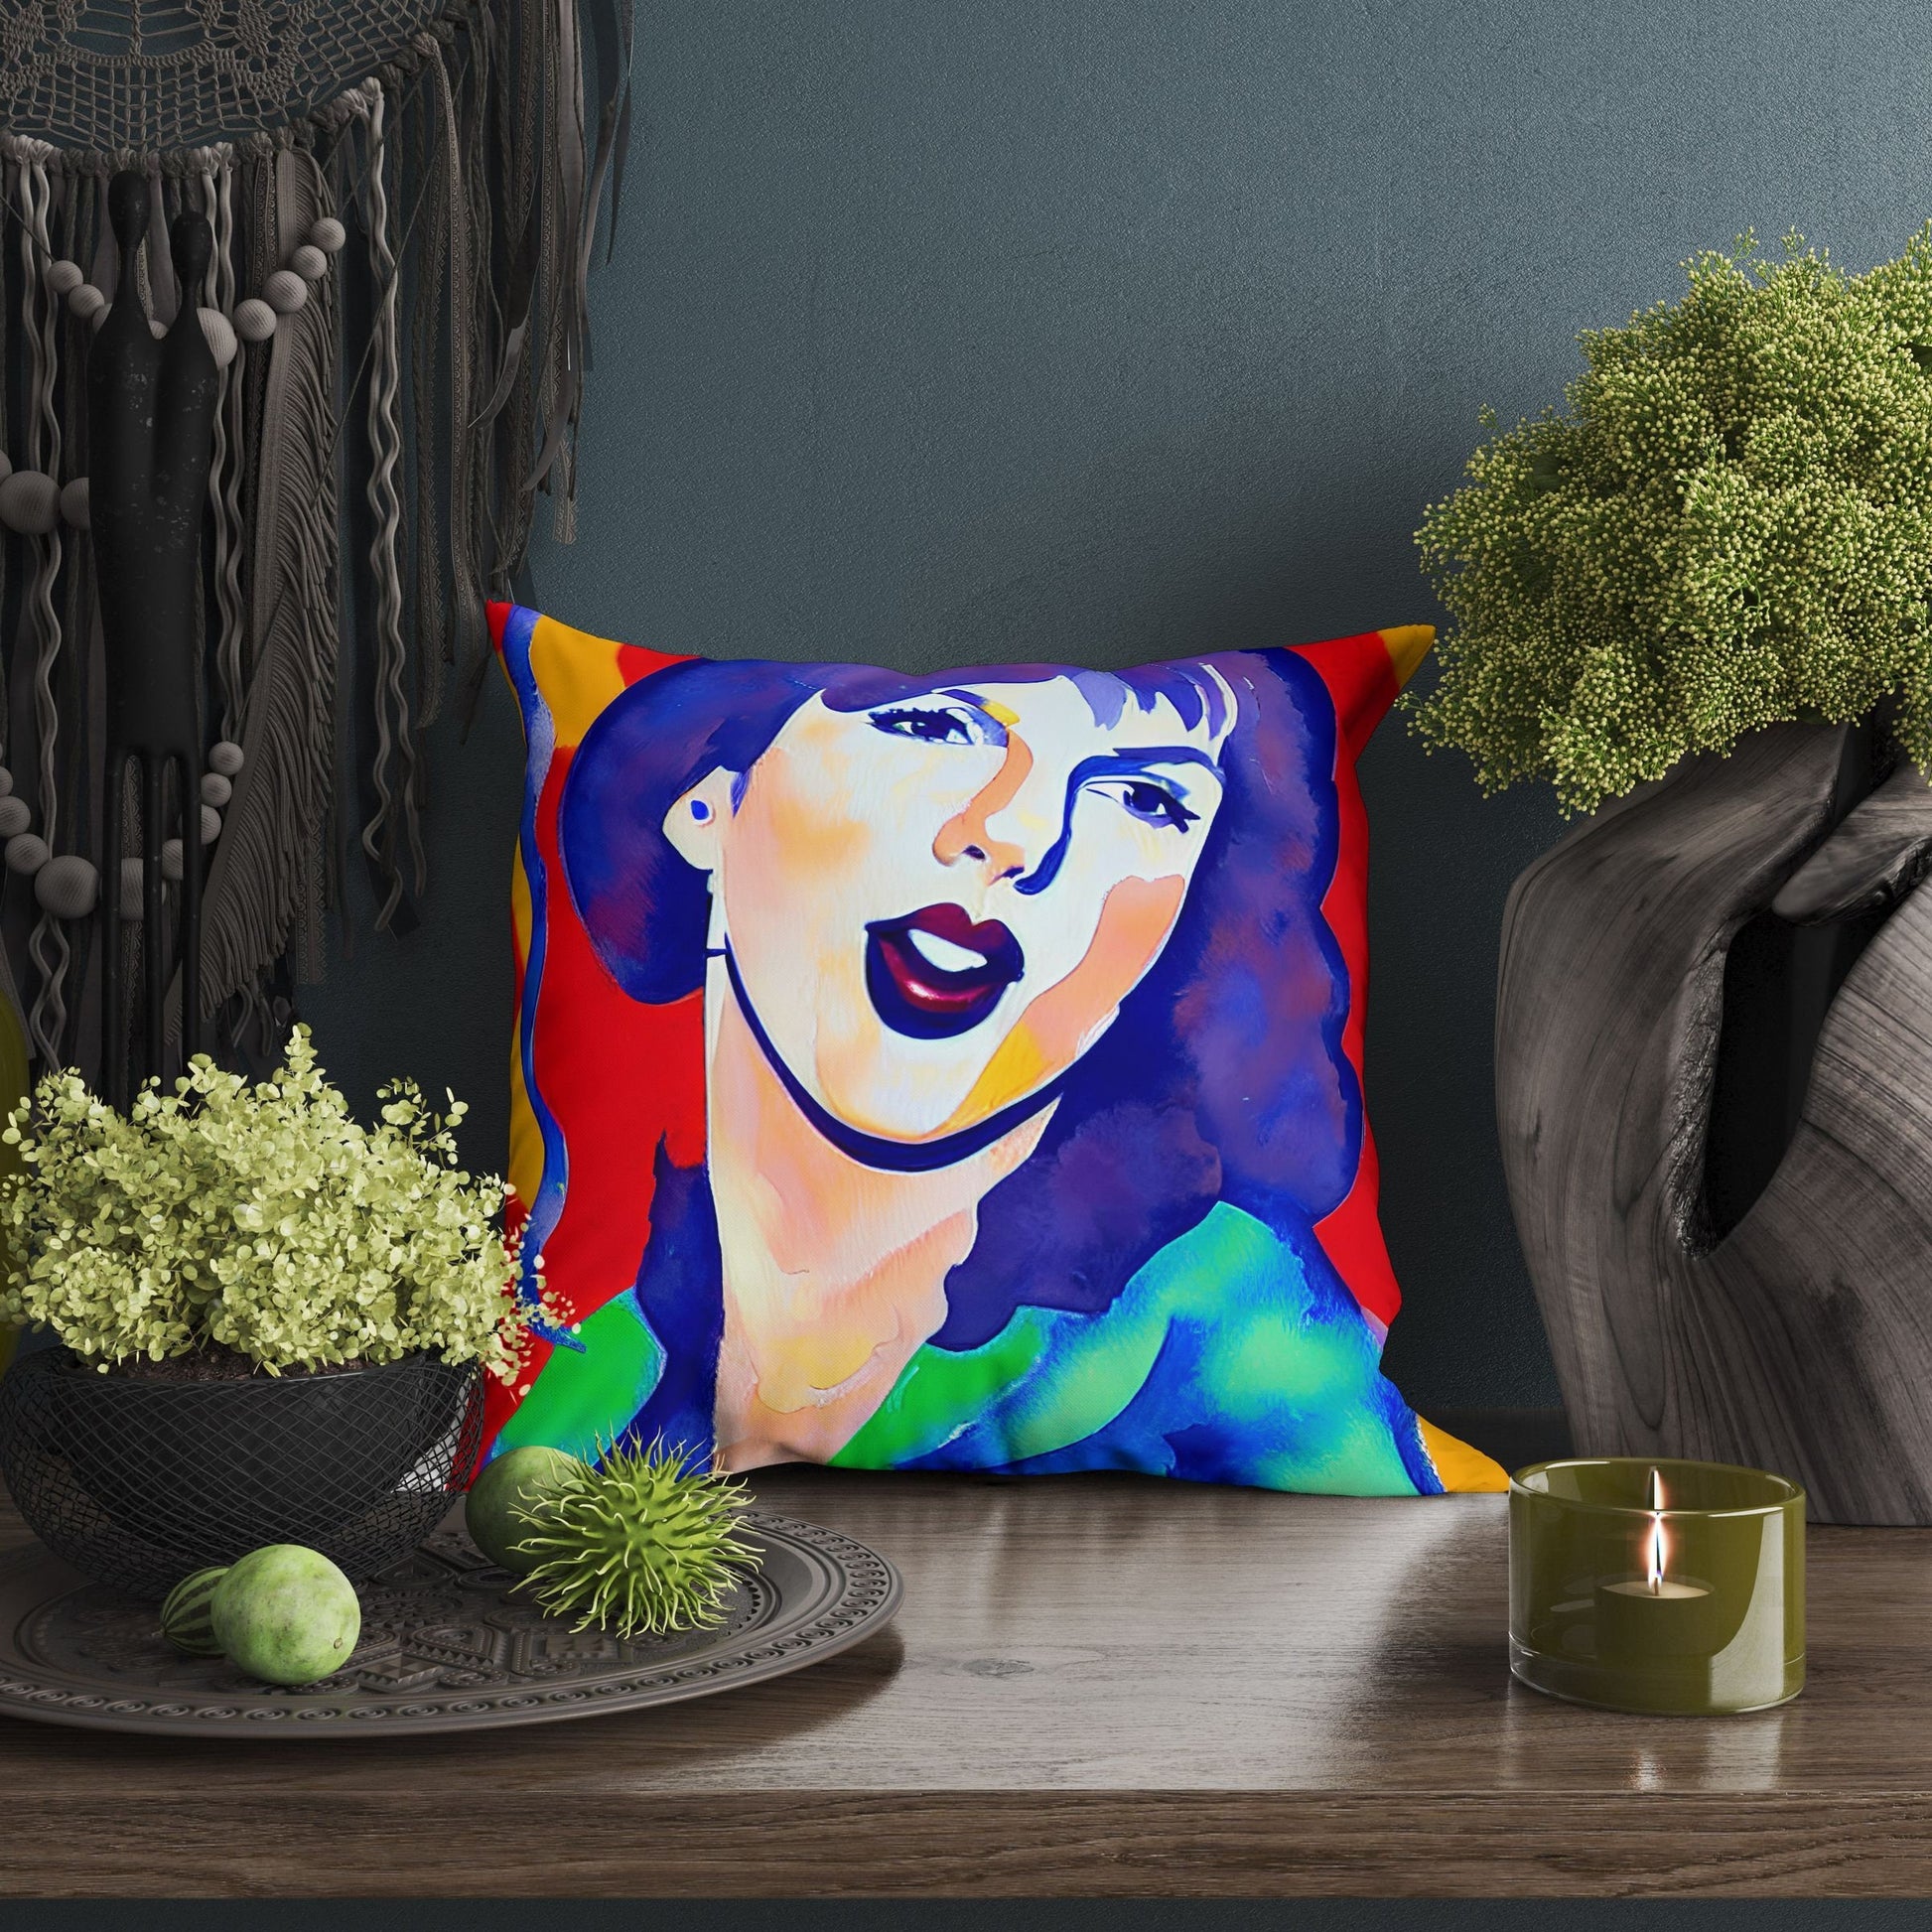 Taylor Swift Throw Pillow Cover, Abstract Pillow, Soft Pillow Cases, Colorful Pillow Case, Fashion, Housewarming Gift, Abstract Decor